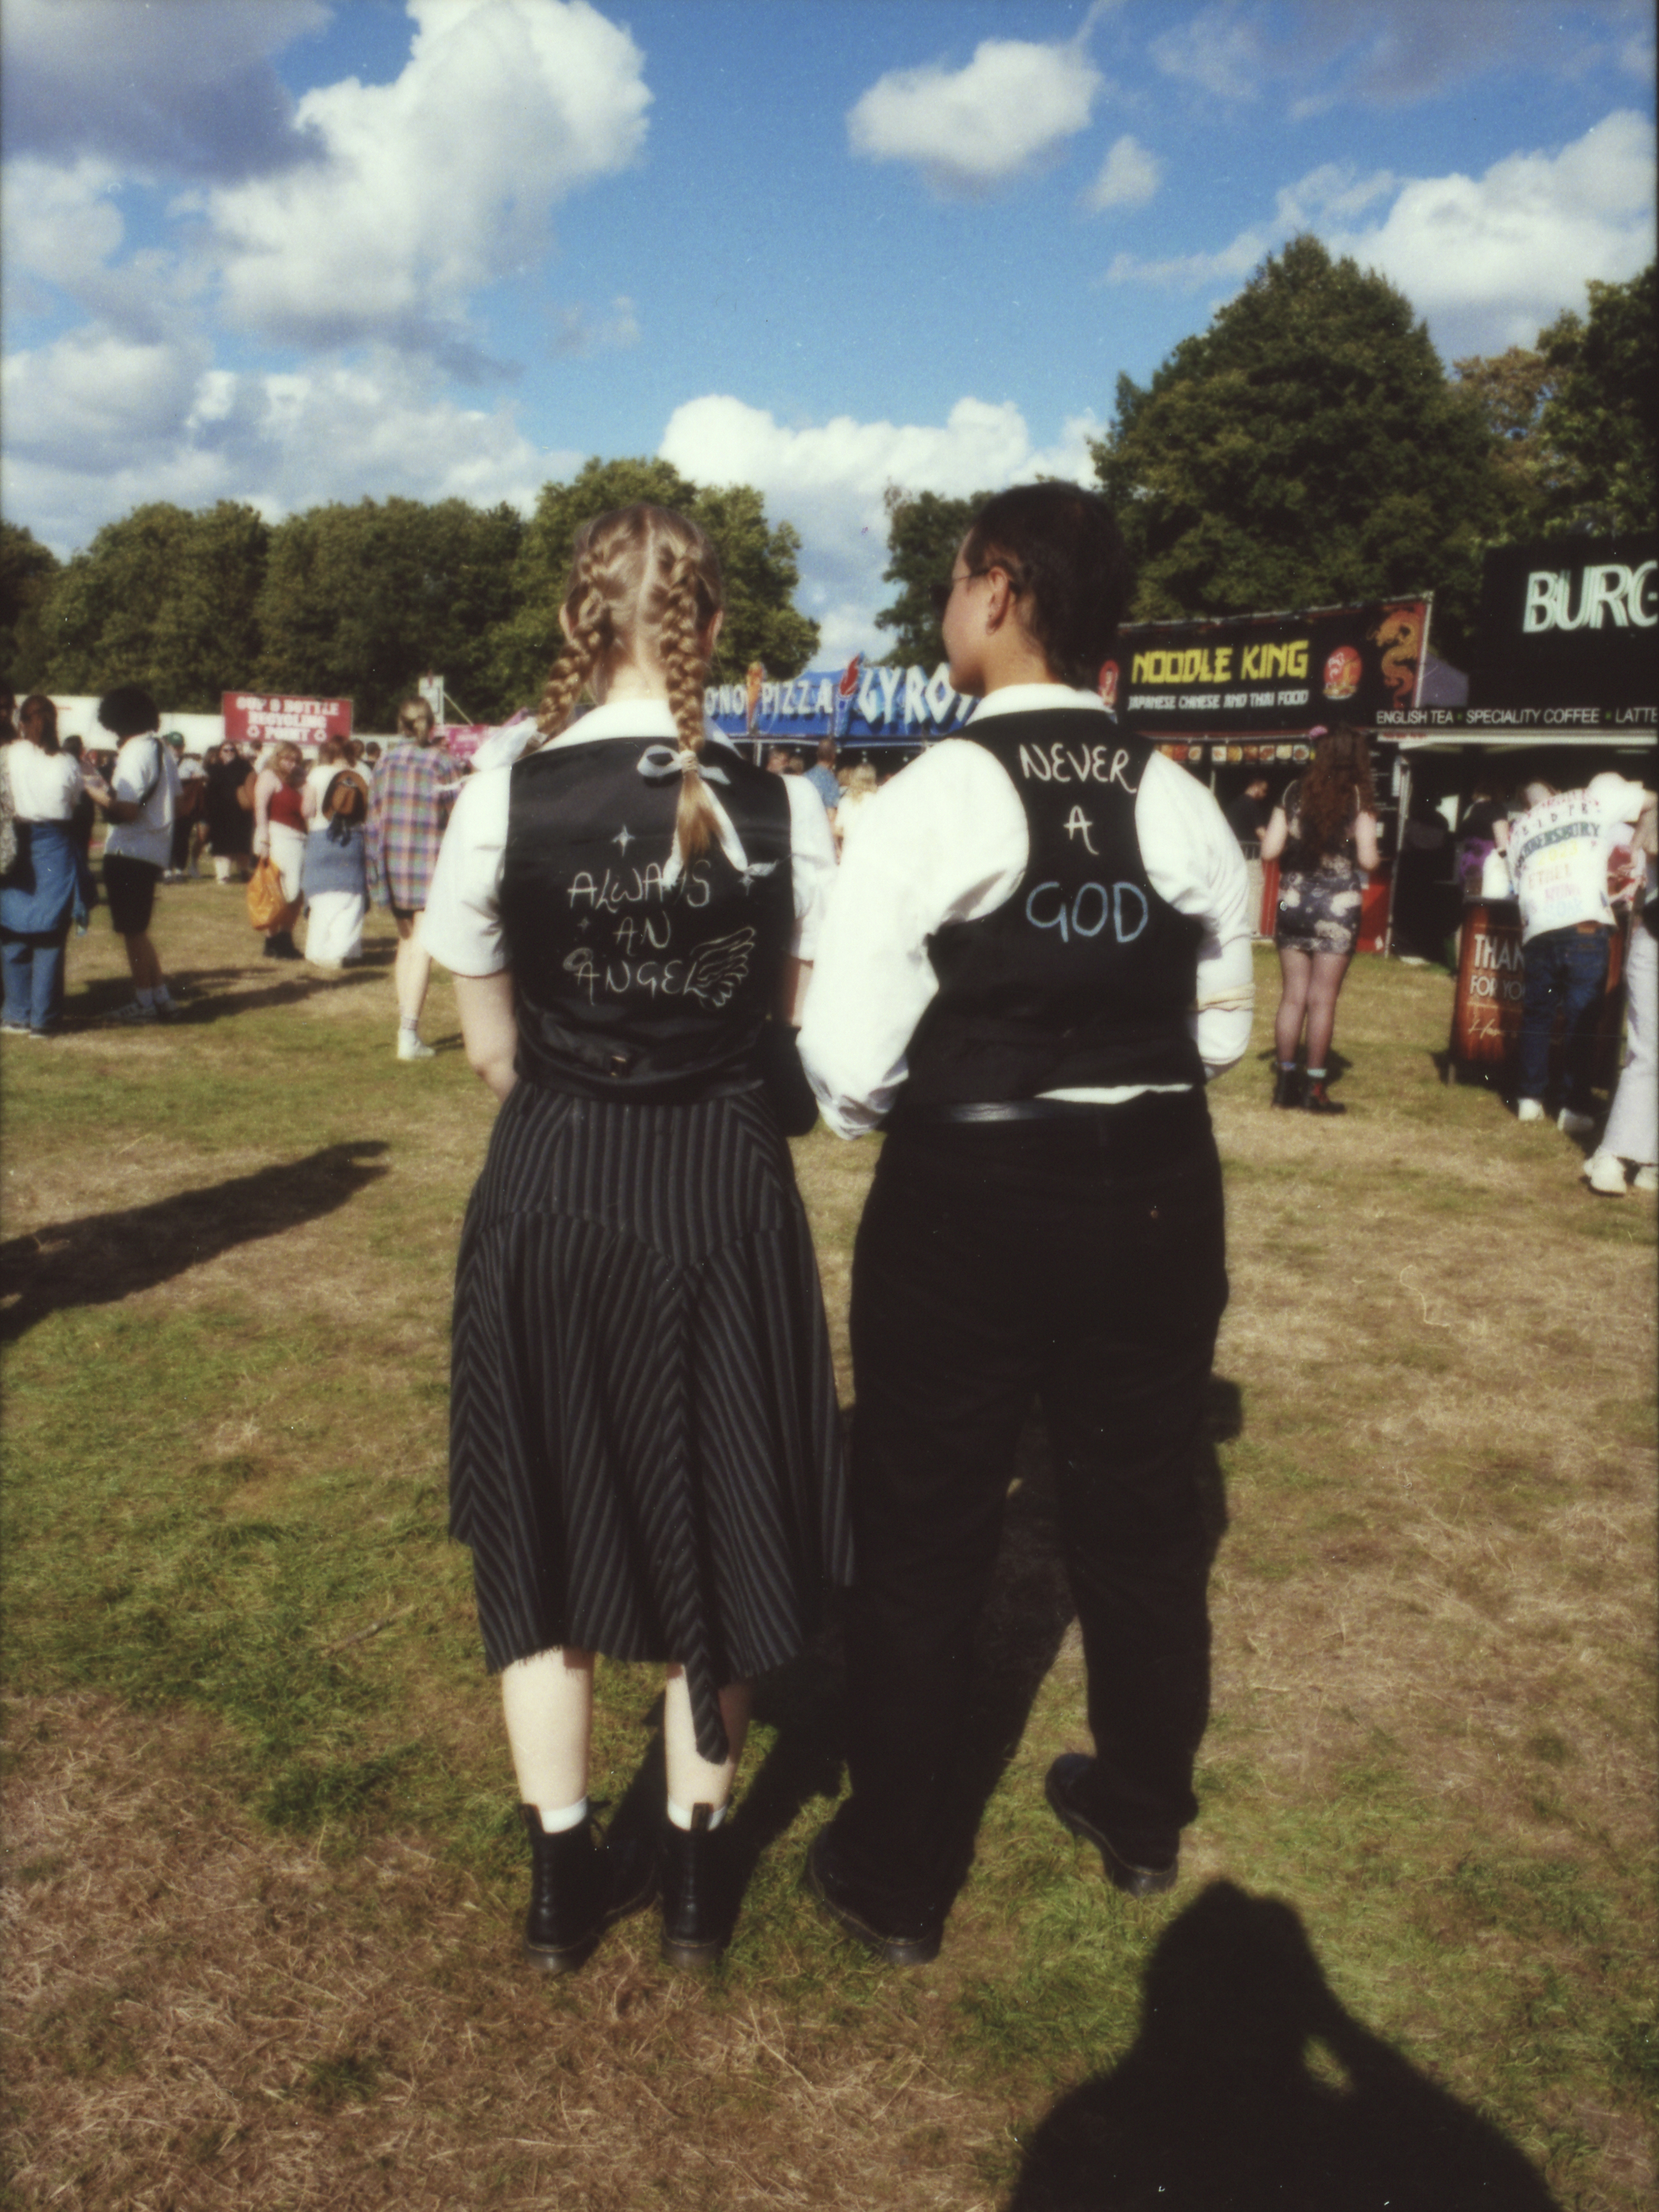 the backs of two people wearing matching vests over shirts; they have handwritten the lyrics 